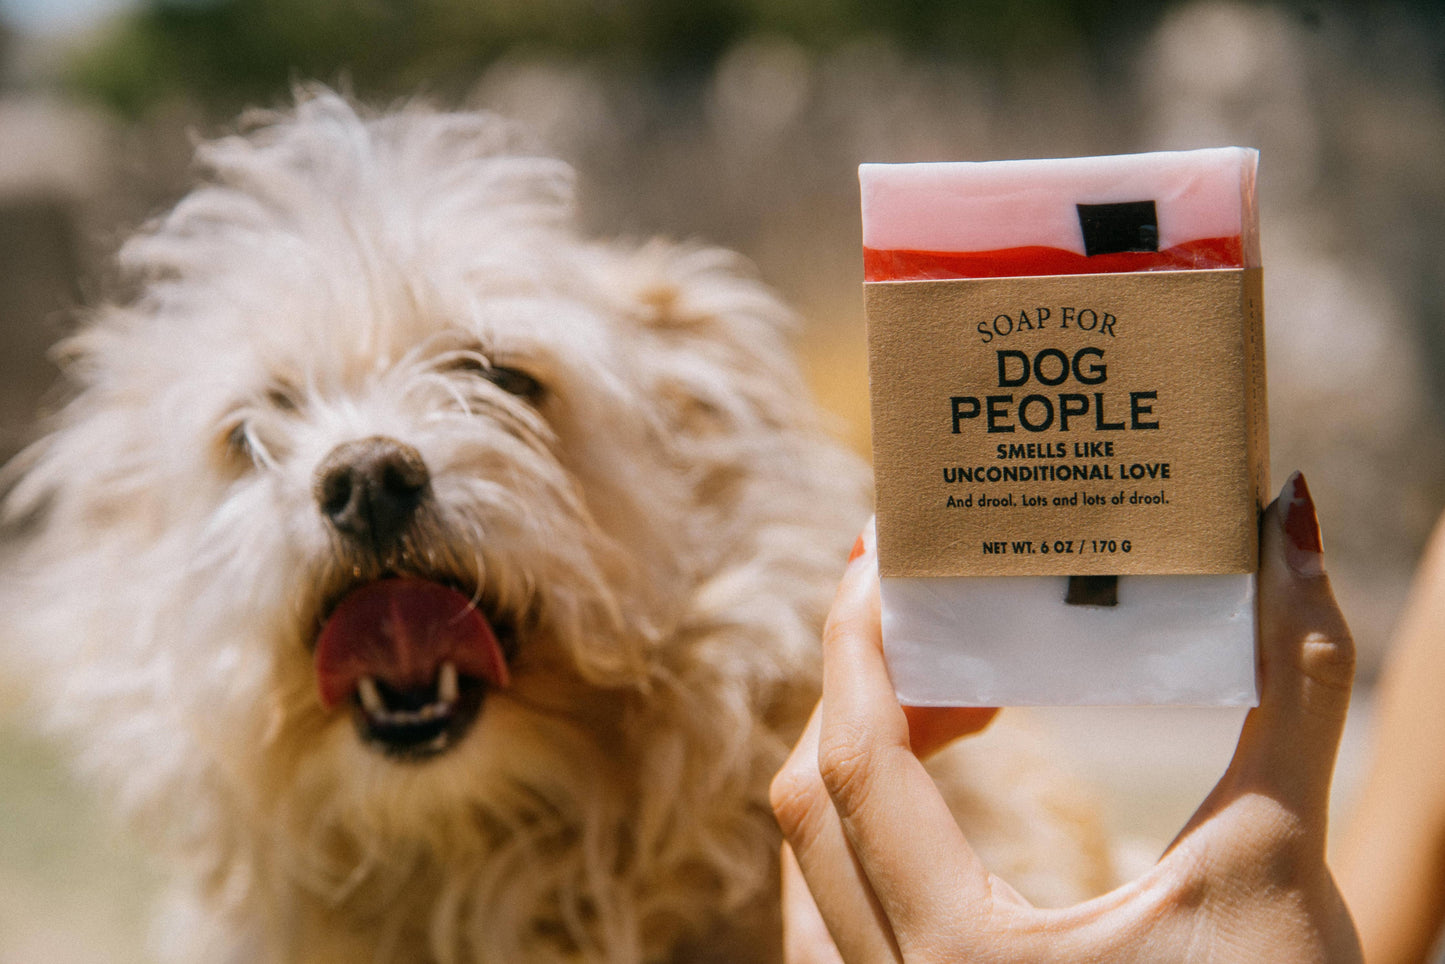 A Soap for Dog People | Funny Soap